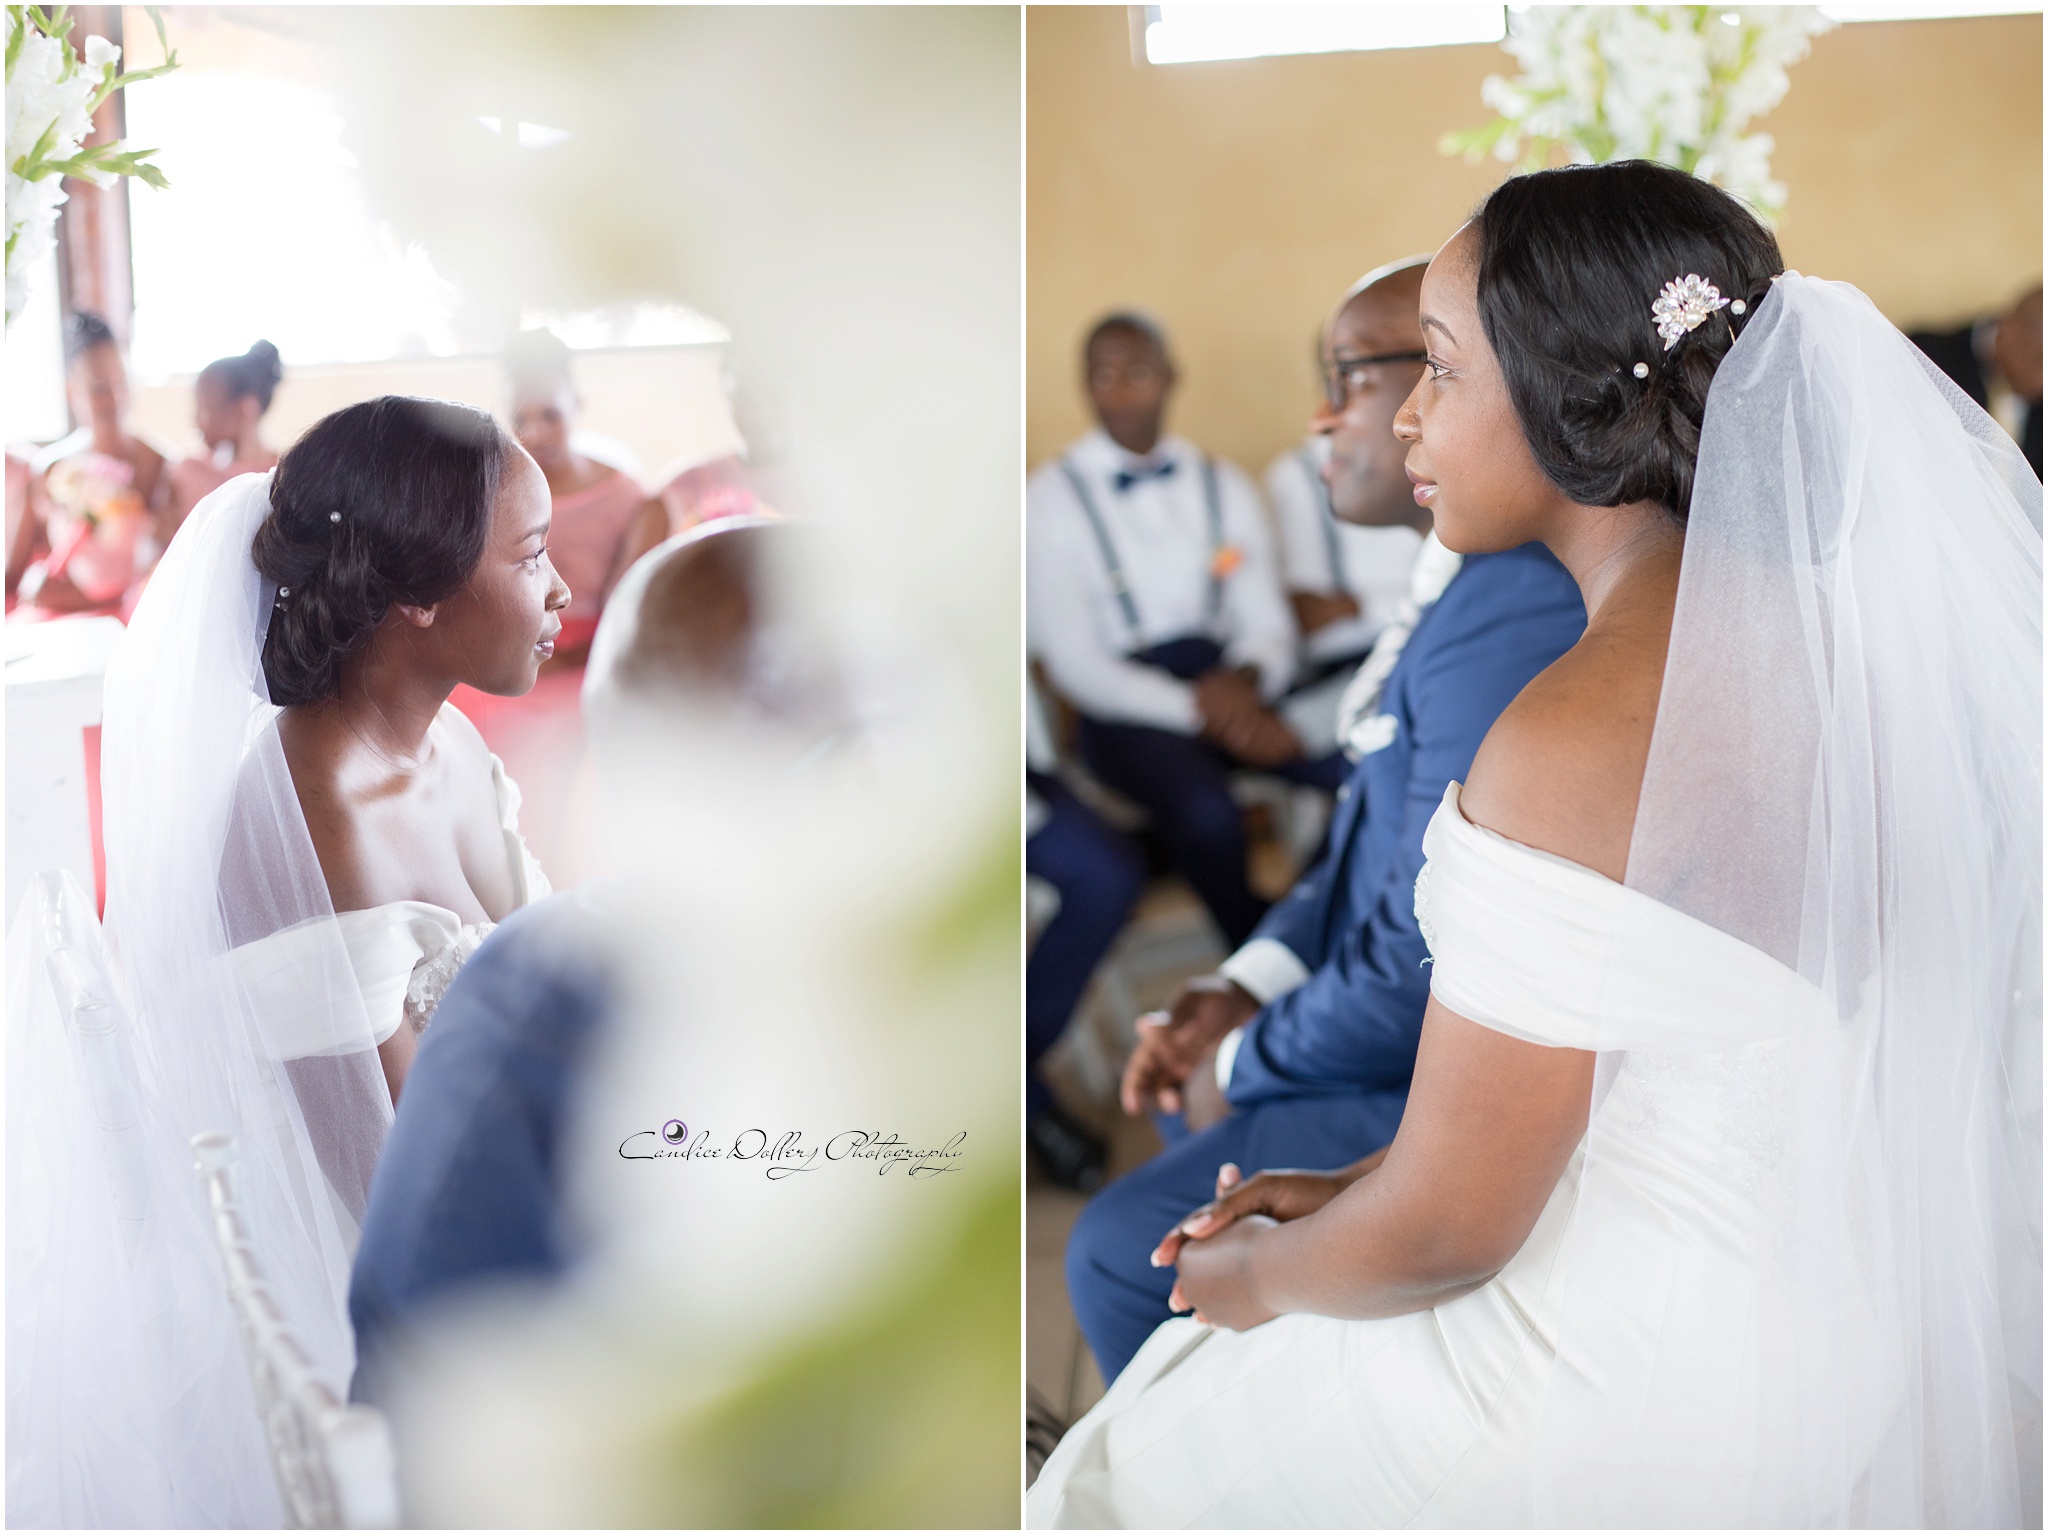 Thembi & Sabelo's Wedding - Candice Dollery Photography_8283